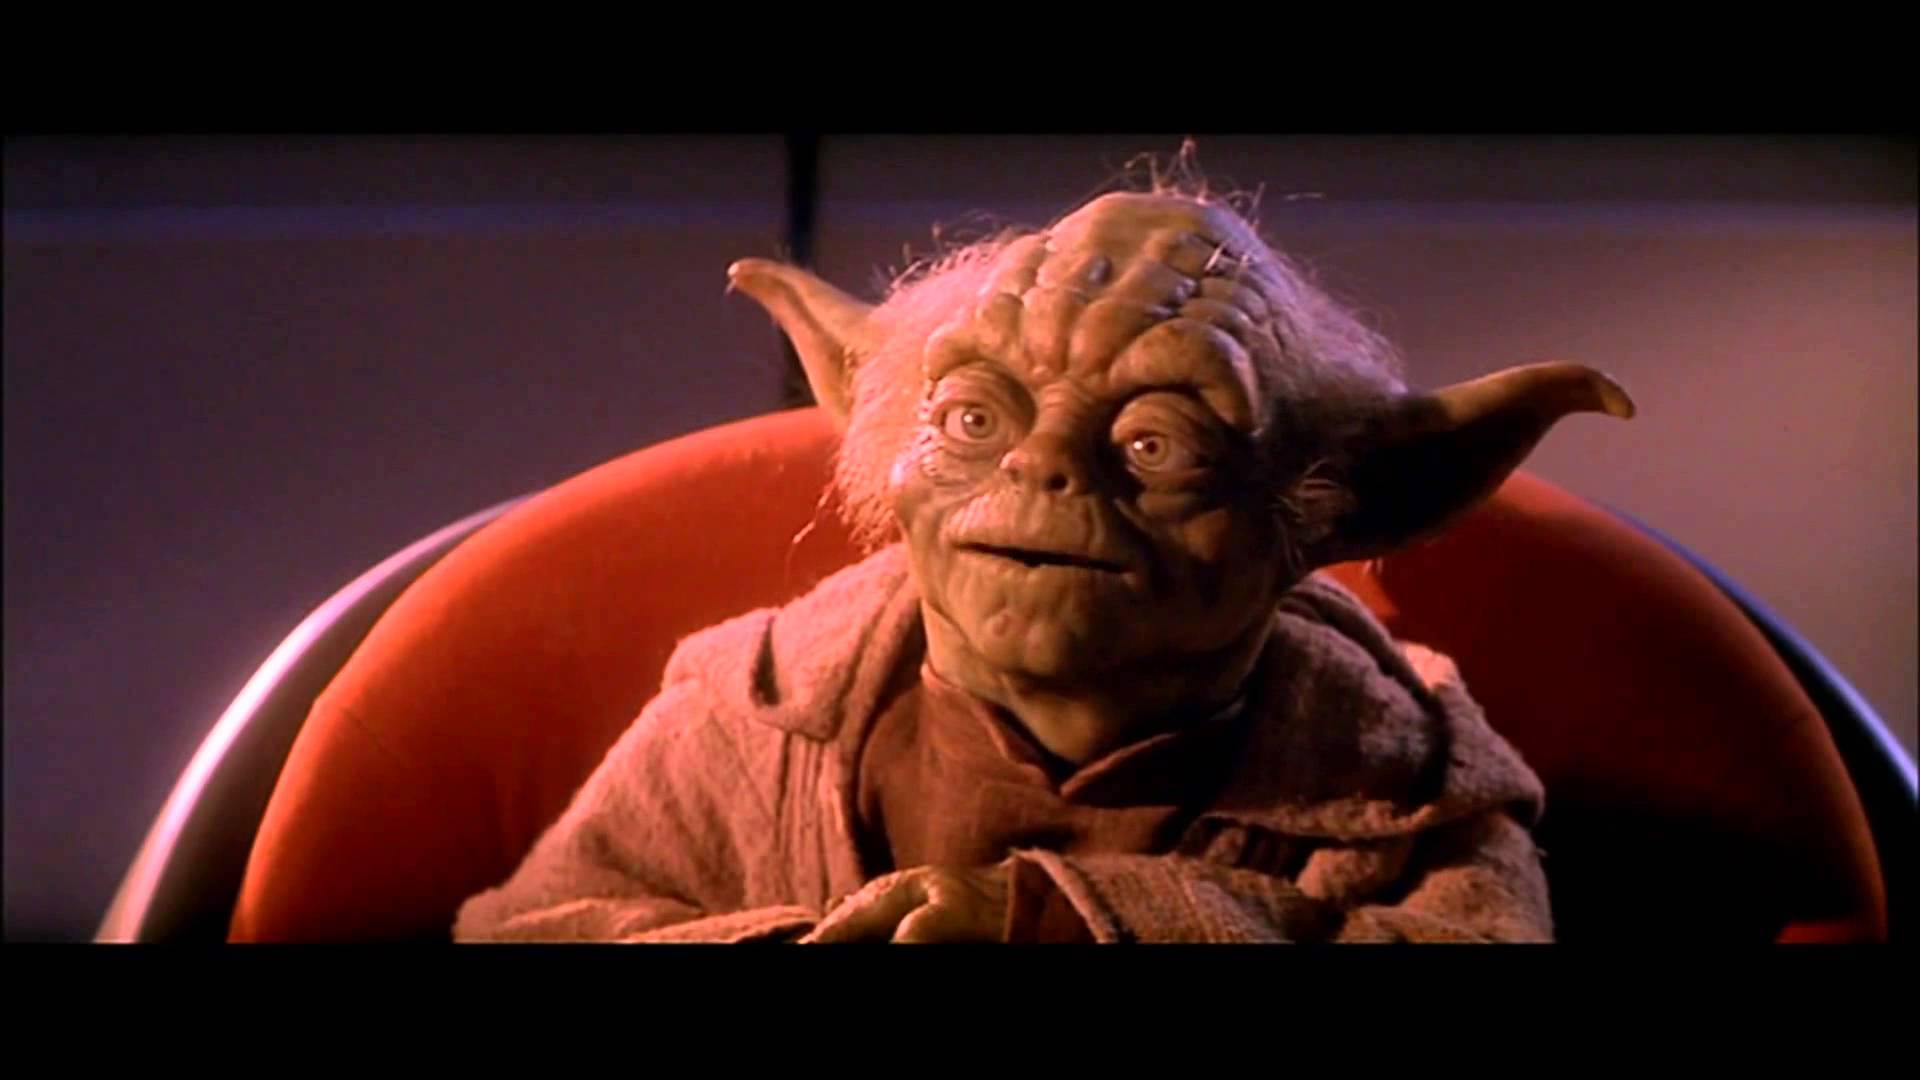 Star Wars Episode I - The Phantom Menace Trailers And TV Spots 1